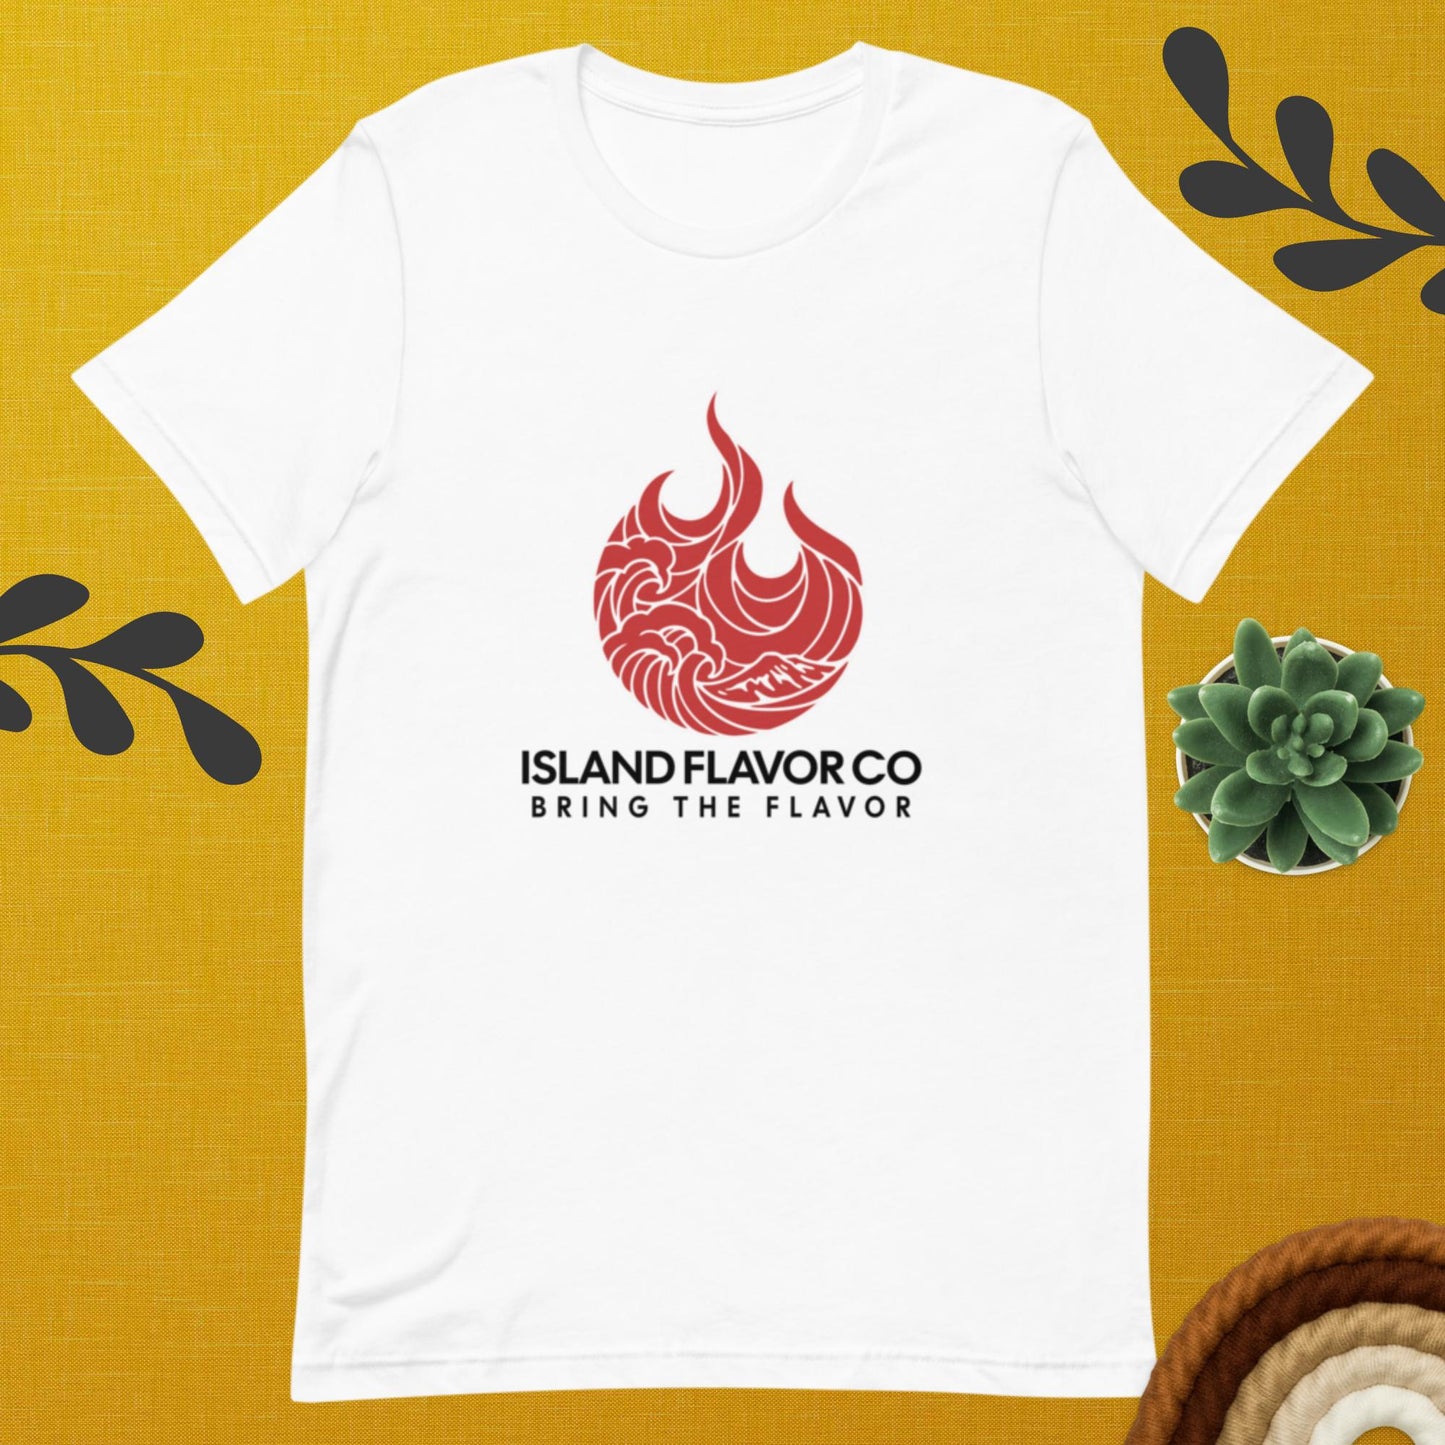 IFC fire logo T-shirt featuring Strawberry Pig wood chip label